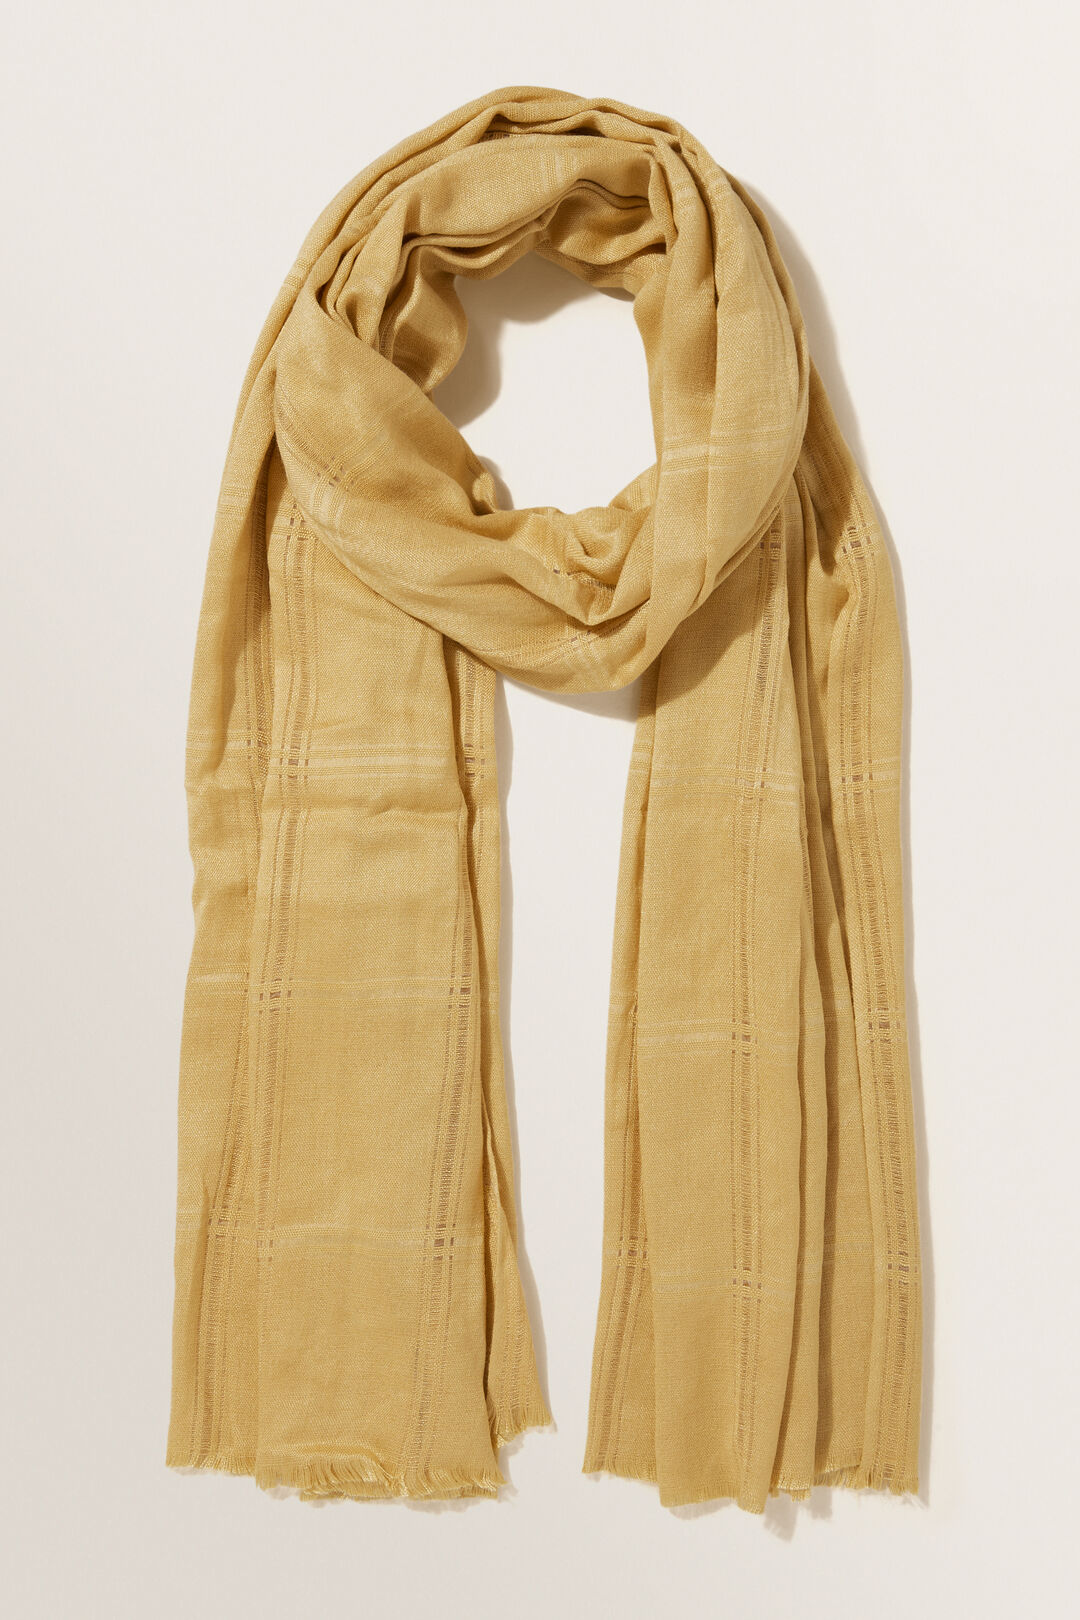 Textured Wool Blend Scarf  Fawn  hi-res